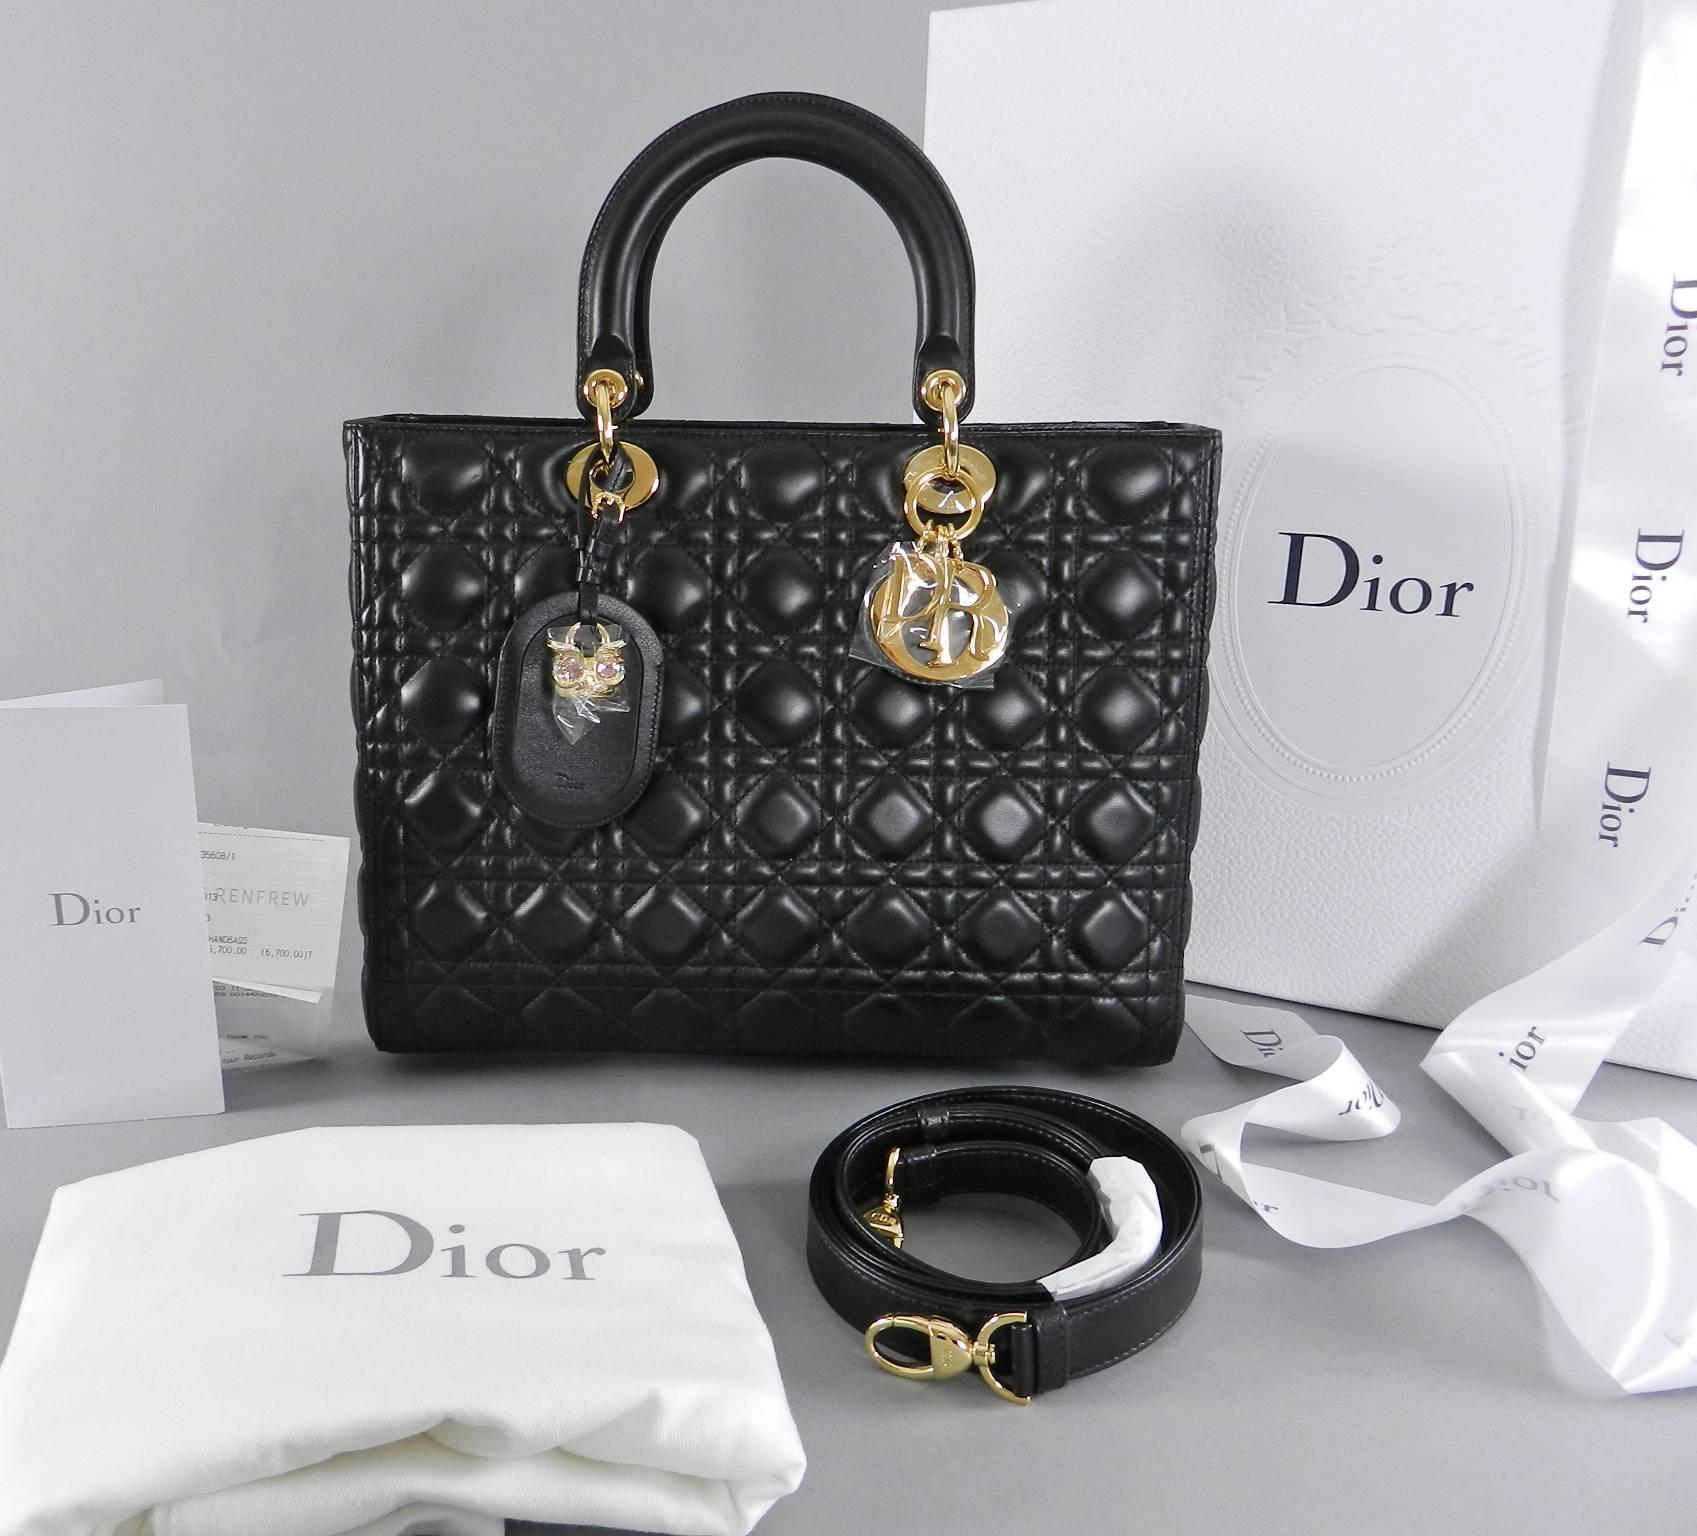 Christian DIOR Lady Dior black lambskin leather tote in size large.  This also includes a Dior jewelled owl bag charm. Brand new never used and with sales receipt from current season. Comes with all papers, duster, box, ribbon, catalogue,